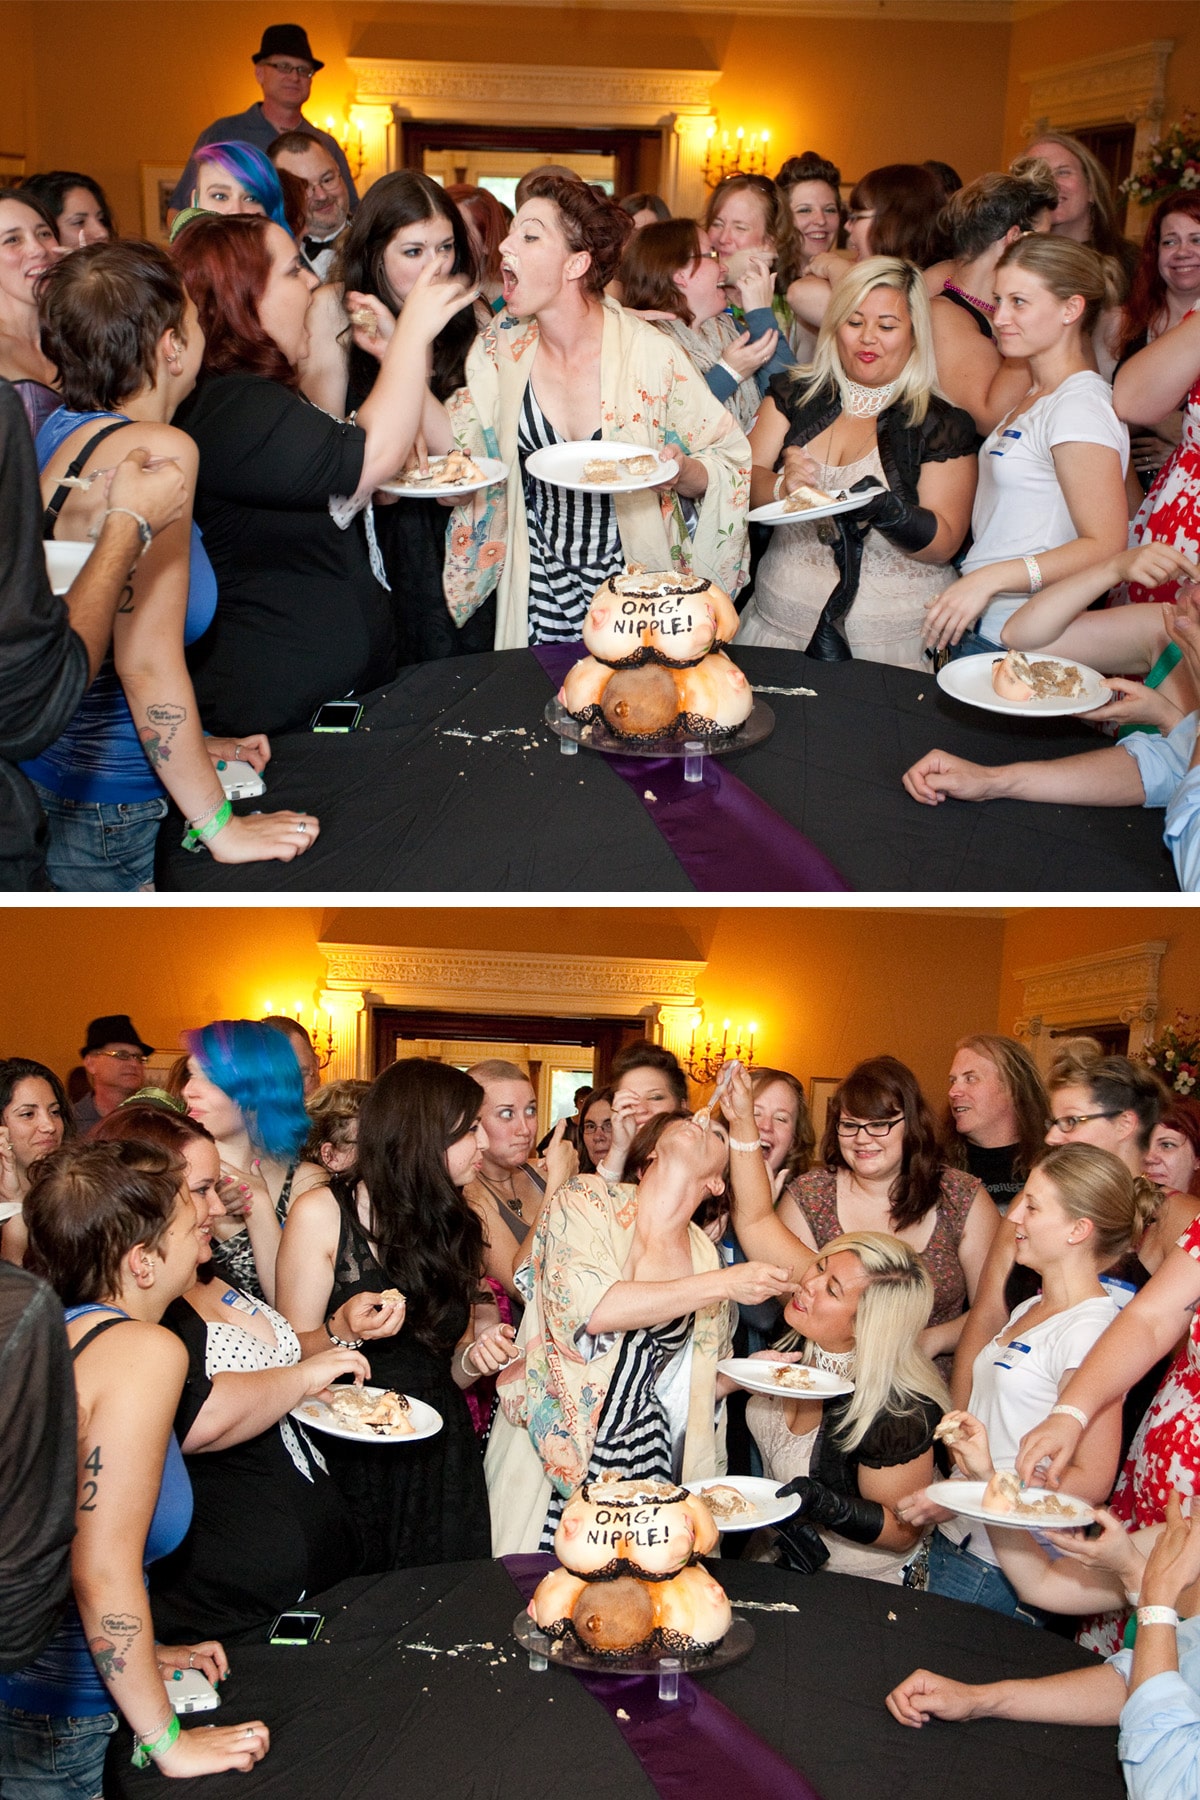 Amanda Palmer cutting and serving her pile of boobs cake.